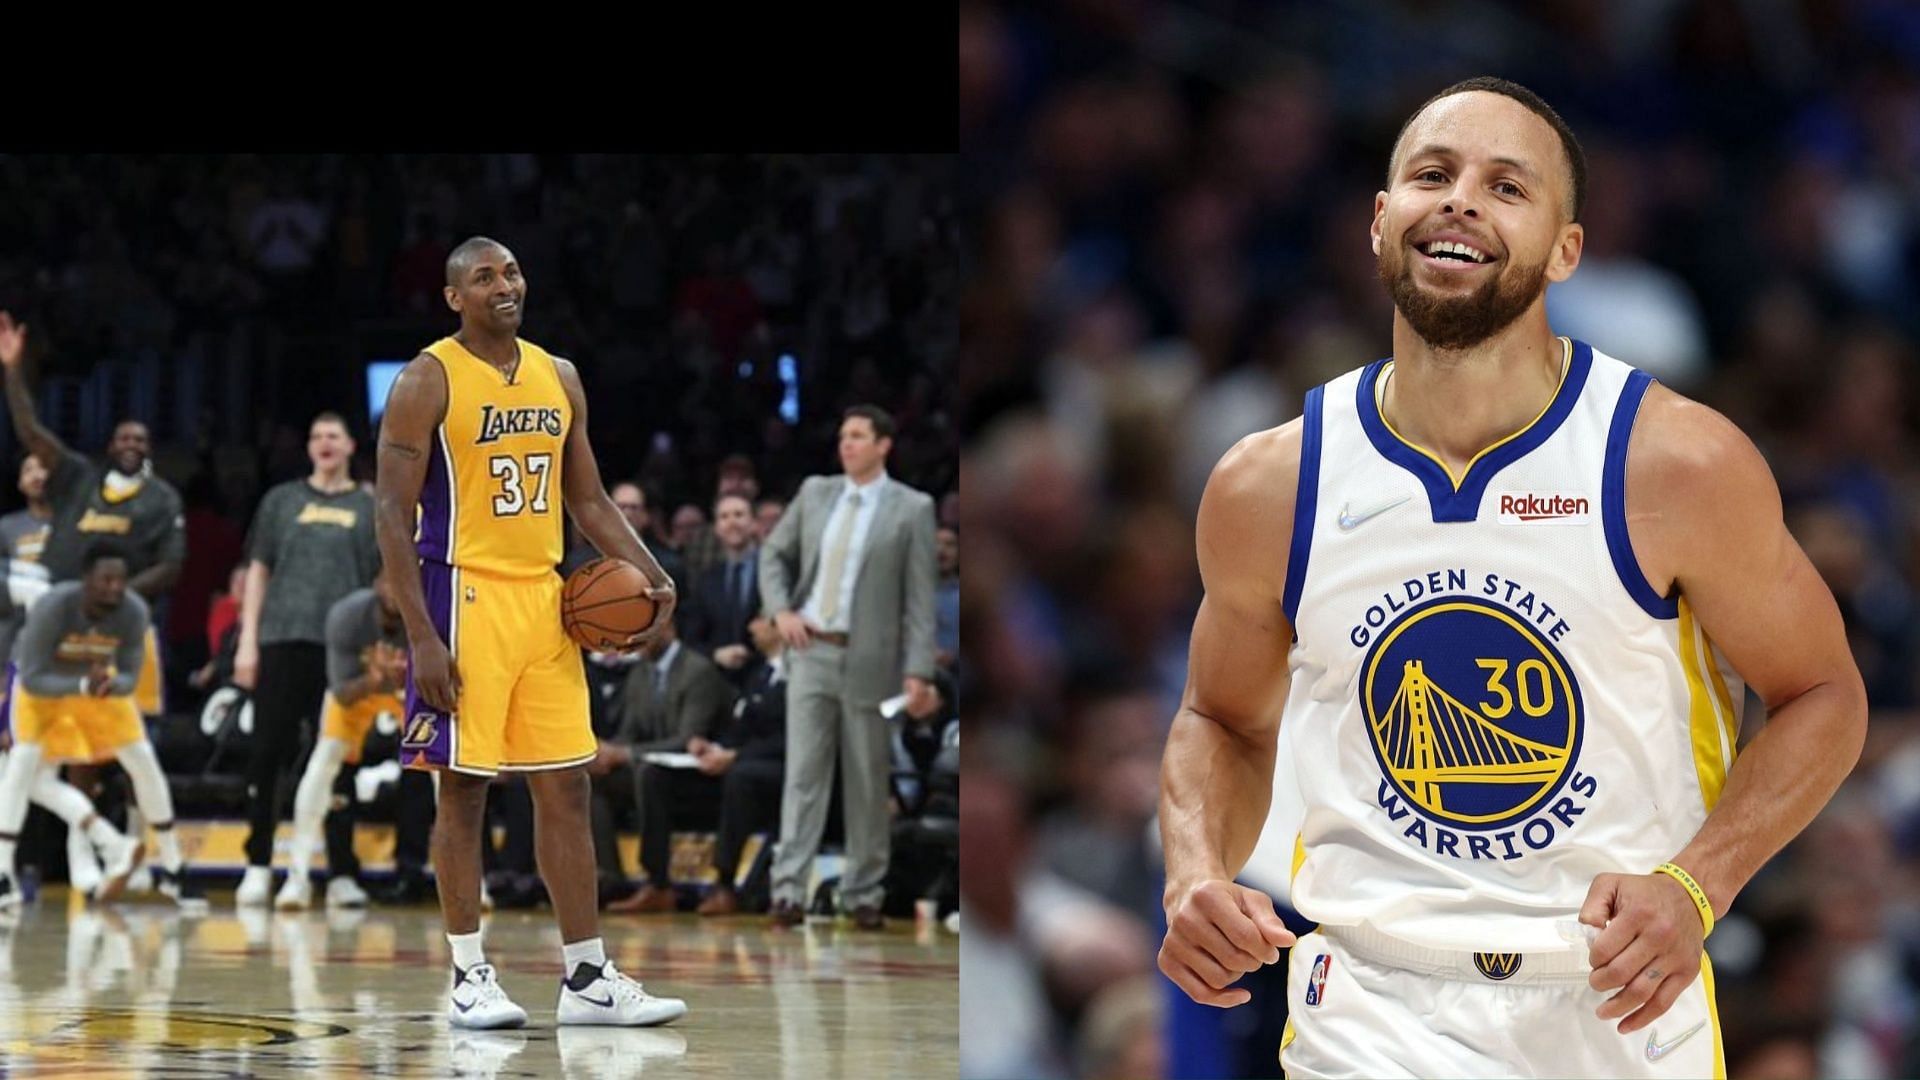 Lakers legend talks about his prediction that Steph Curry would win MVP two years before he actually did